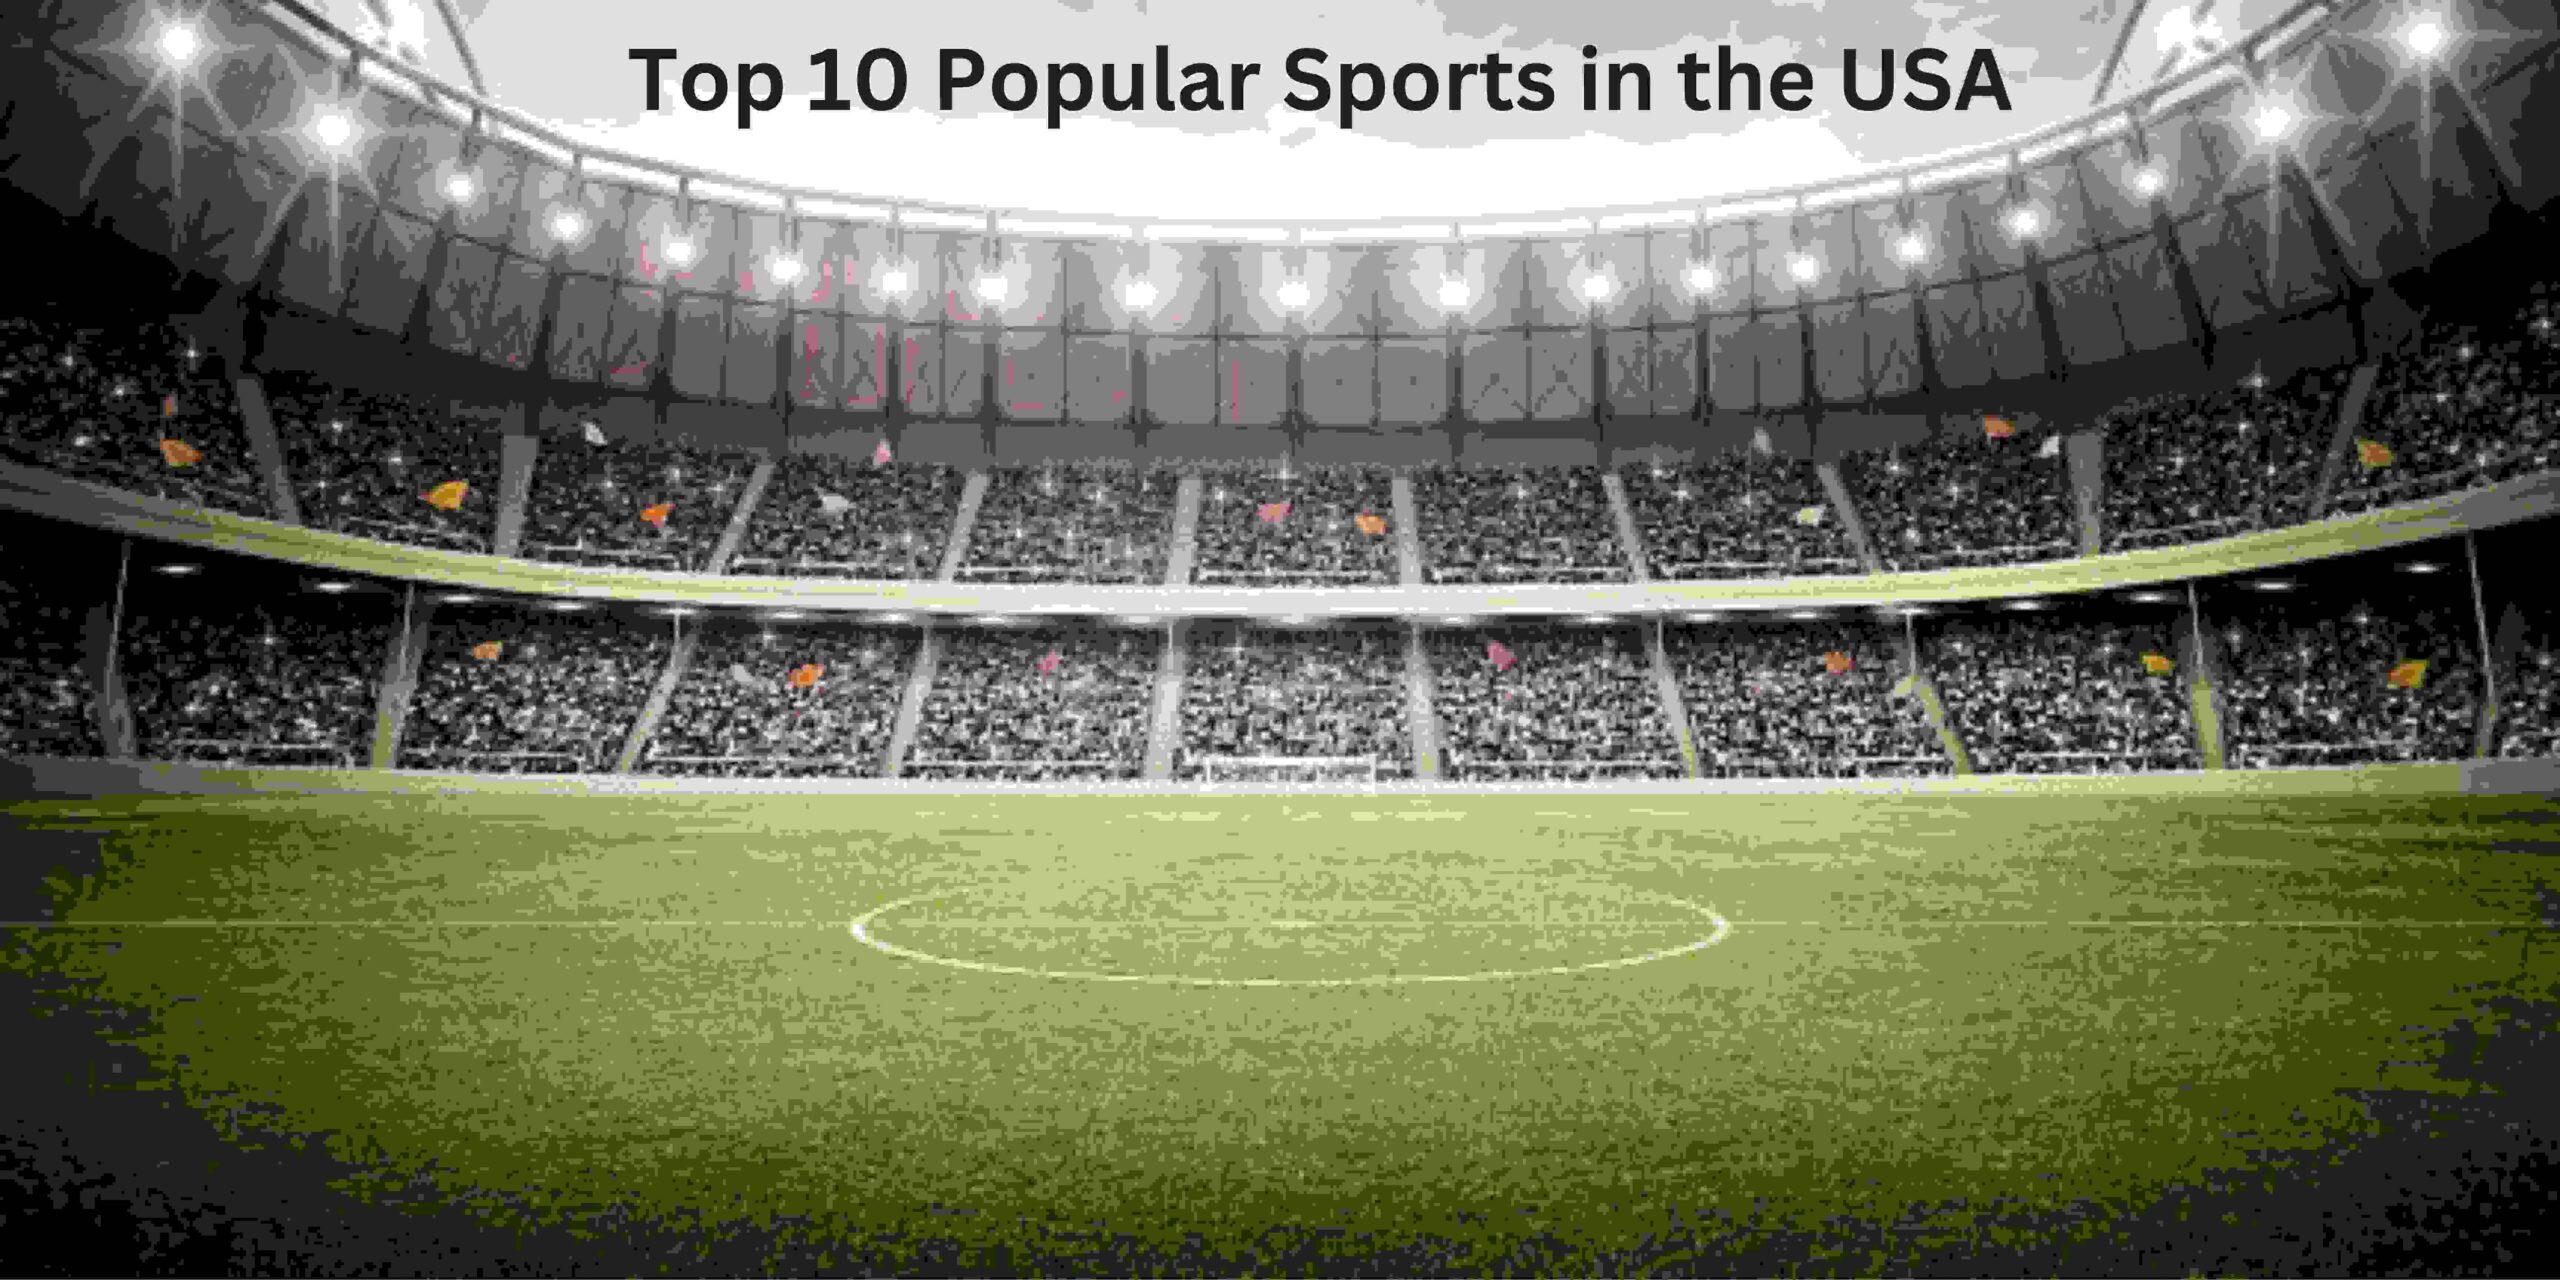 Top 10 Popular Sports in the USA